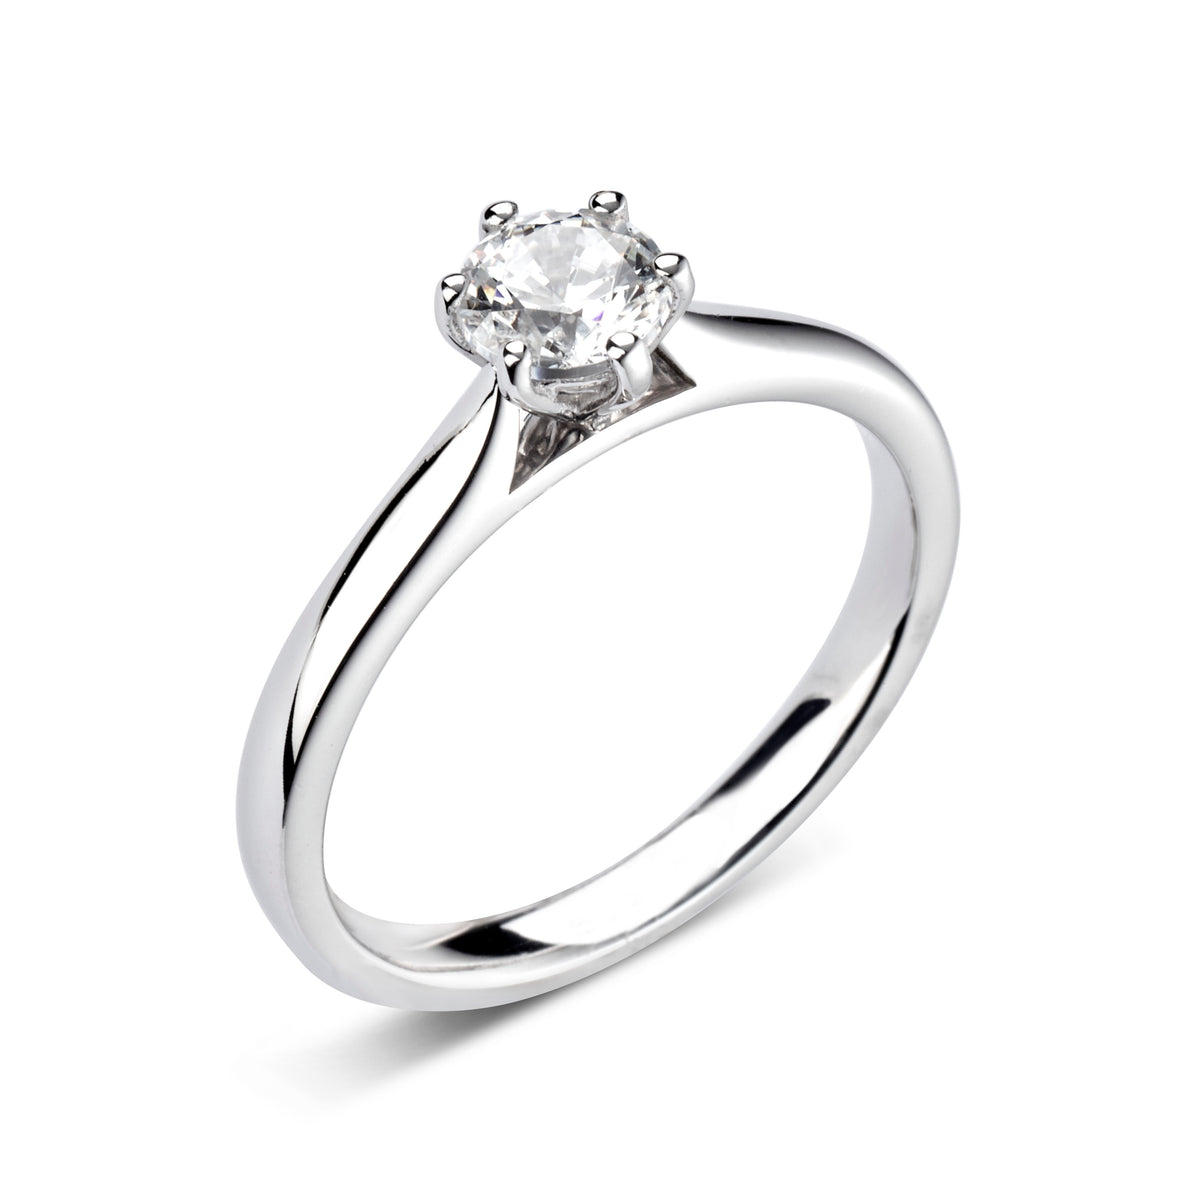 Six Claw Solitaire Diamond Engagement Ring | Bespoke 114